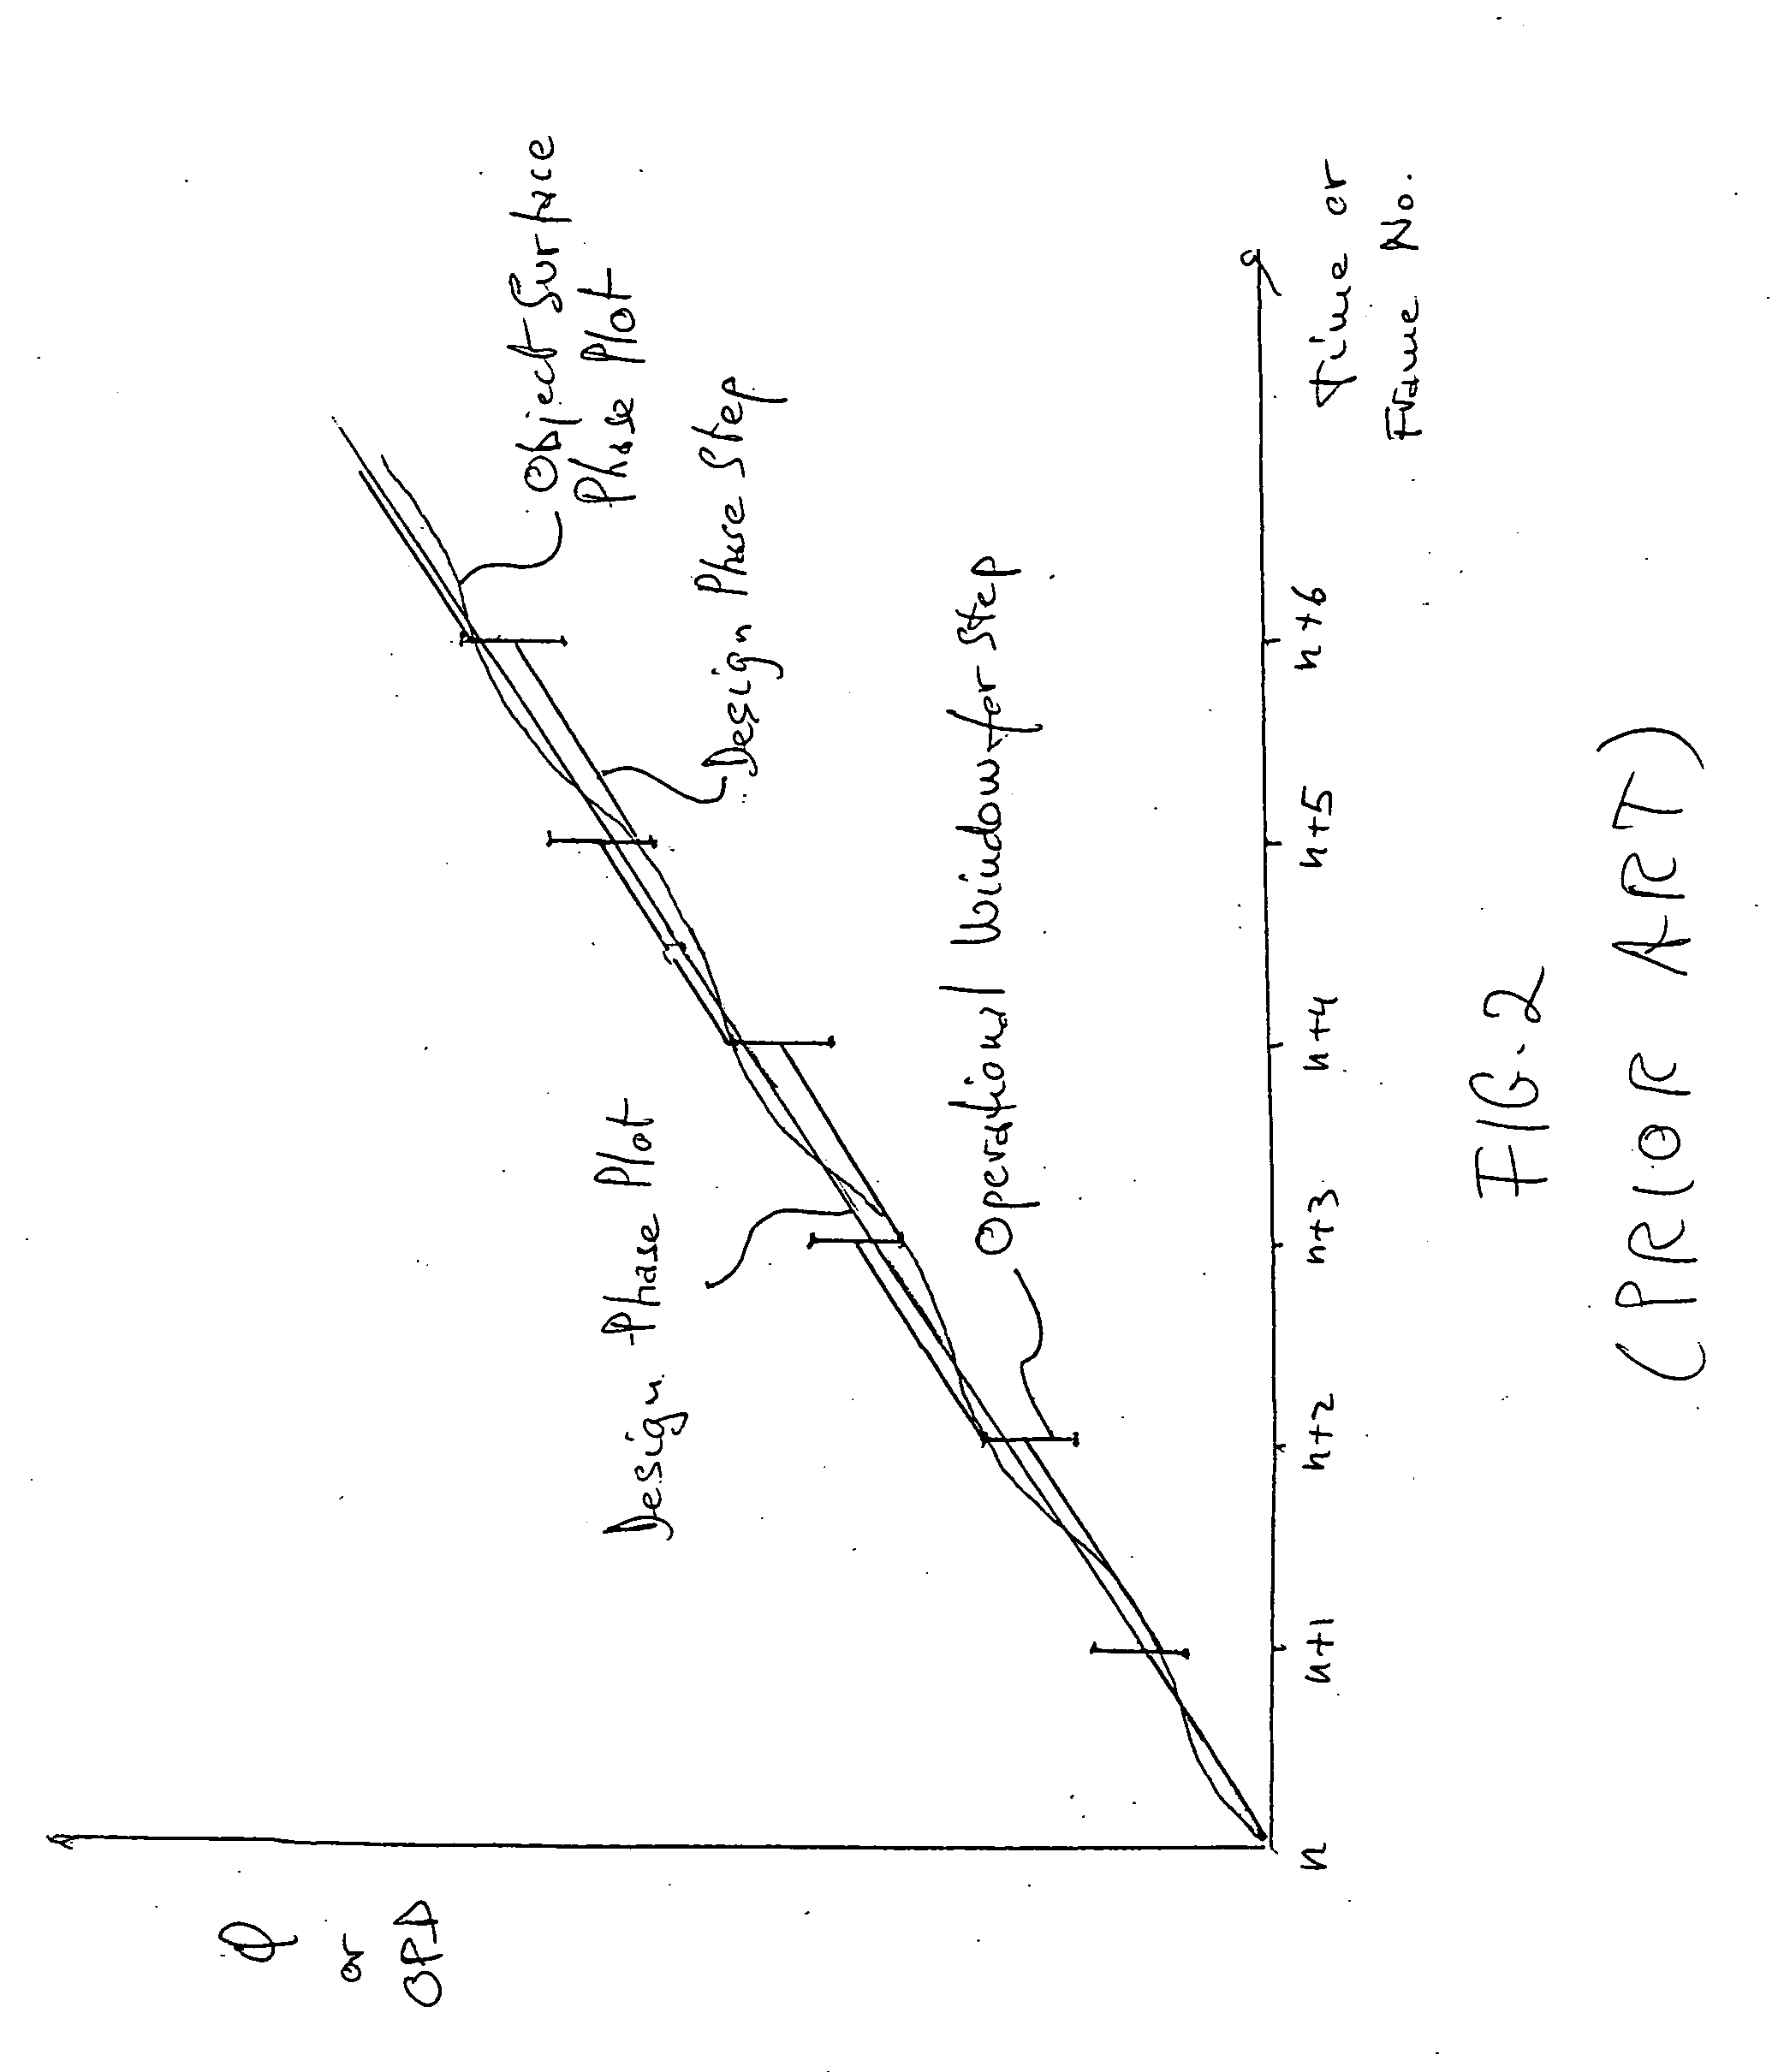 Measurement of object deformation with optical profiler